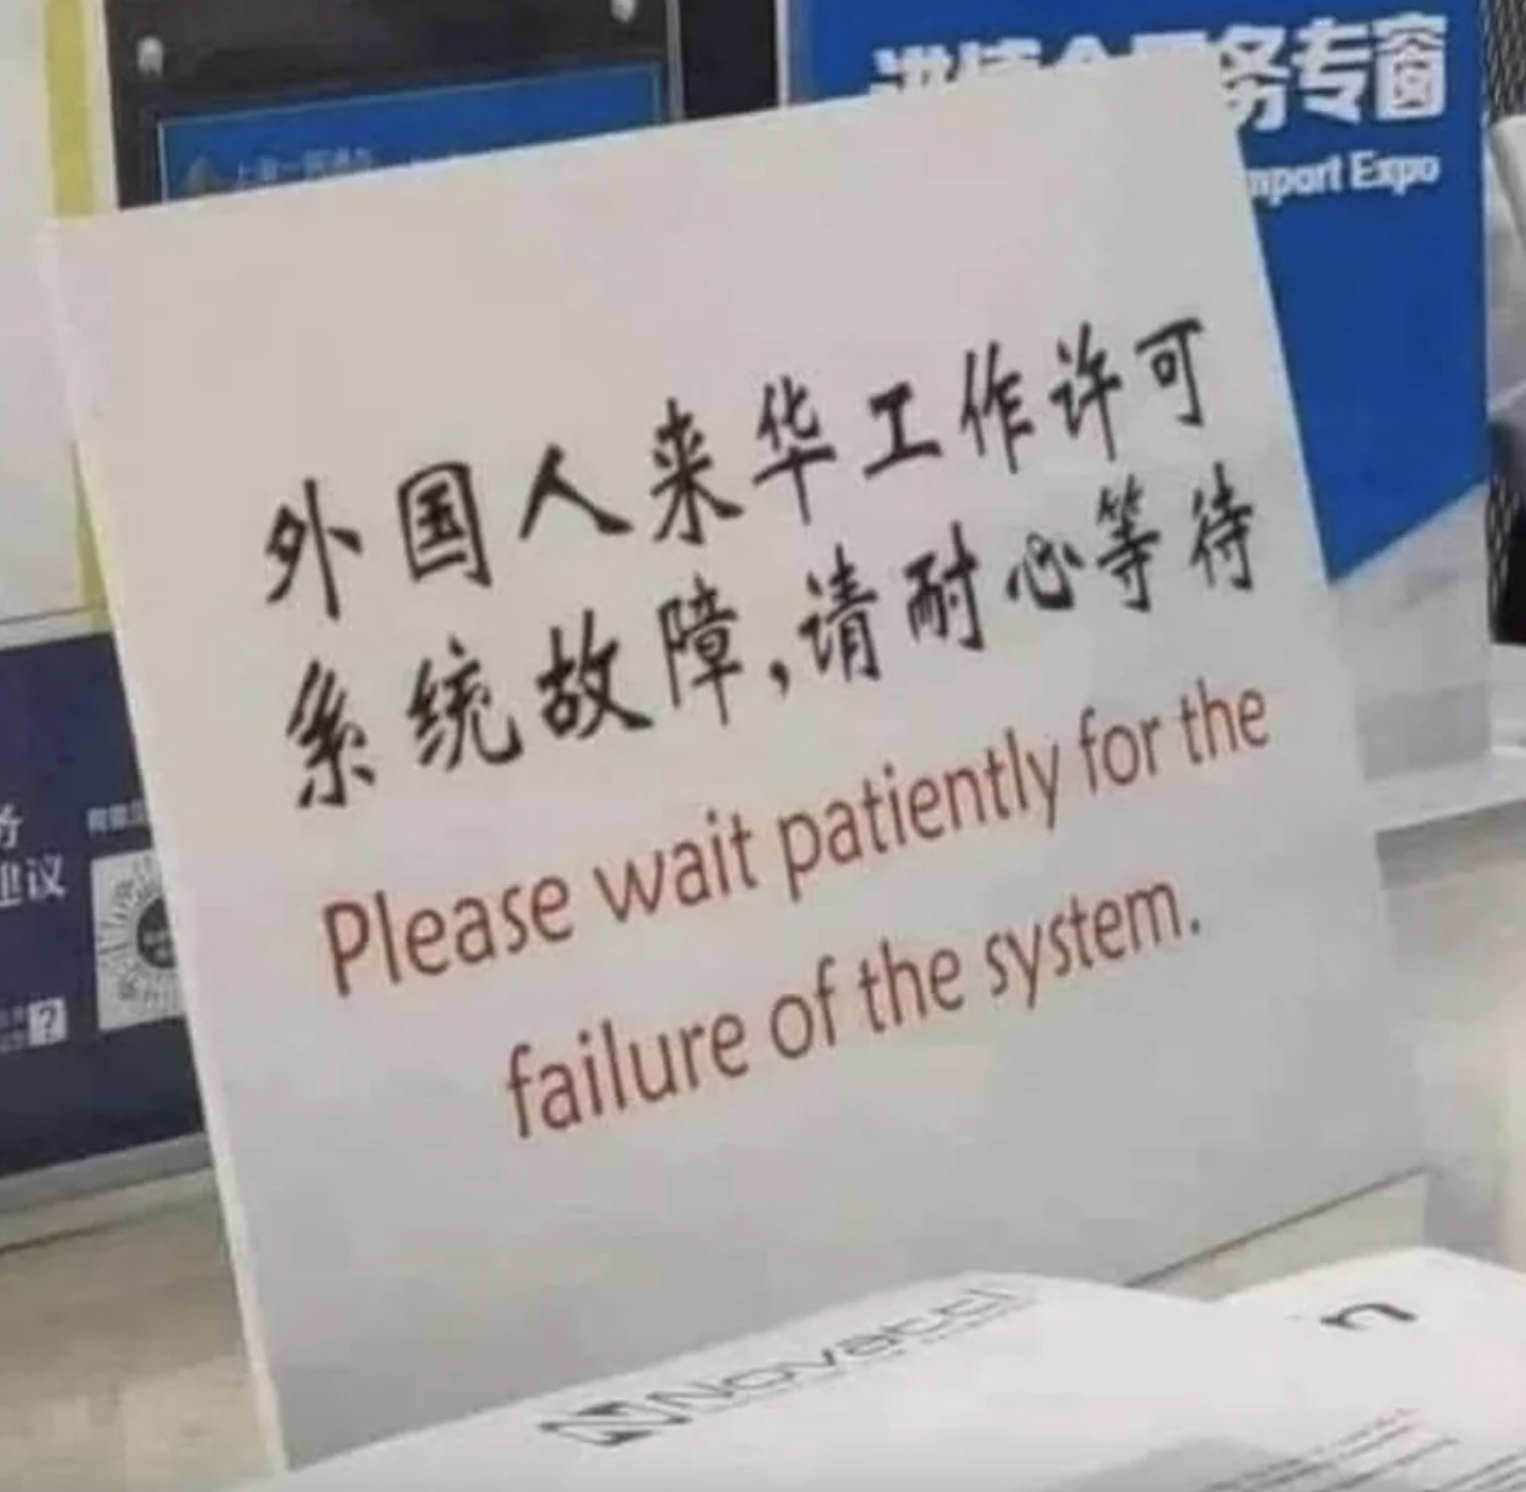 &quot;Please wait patiently for the failure of the system&quot; below what looks like Chinest